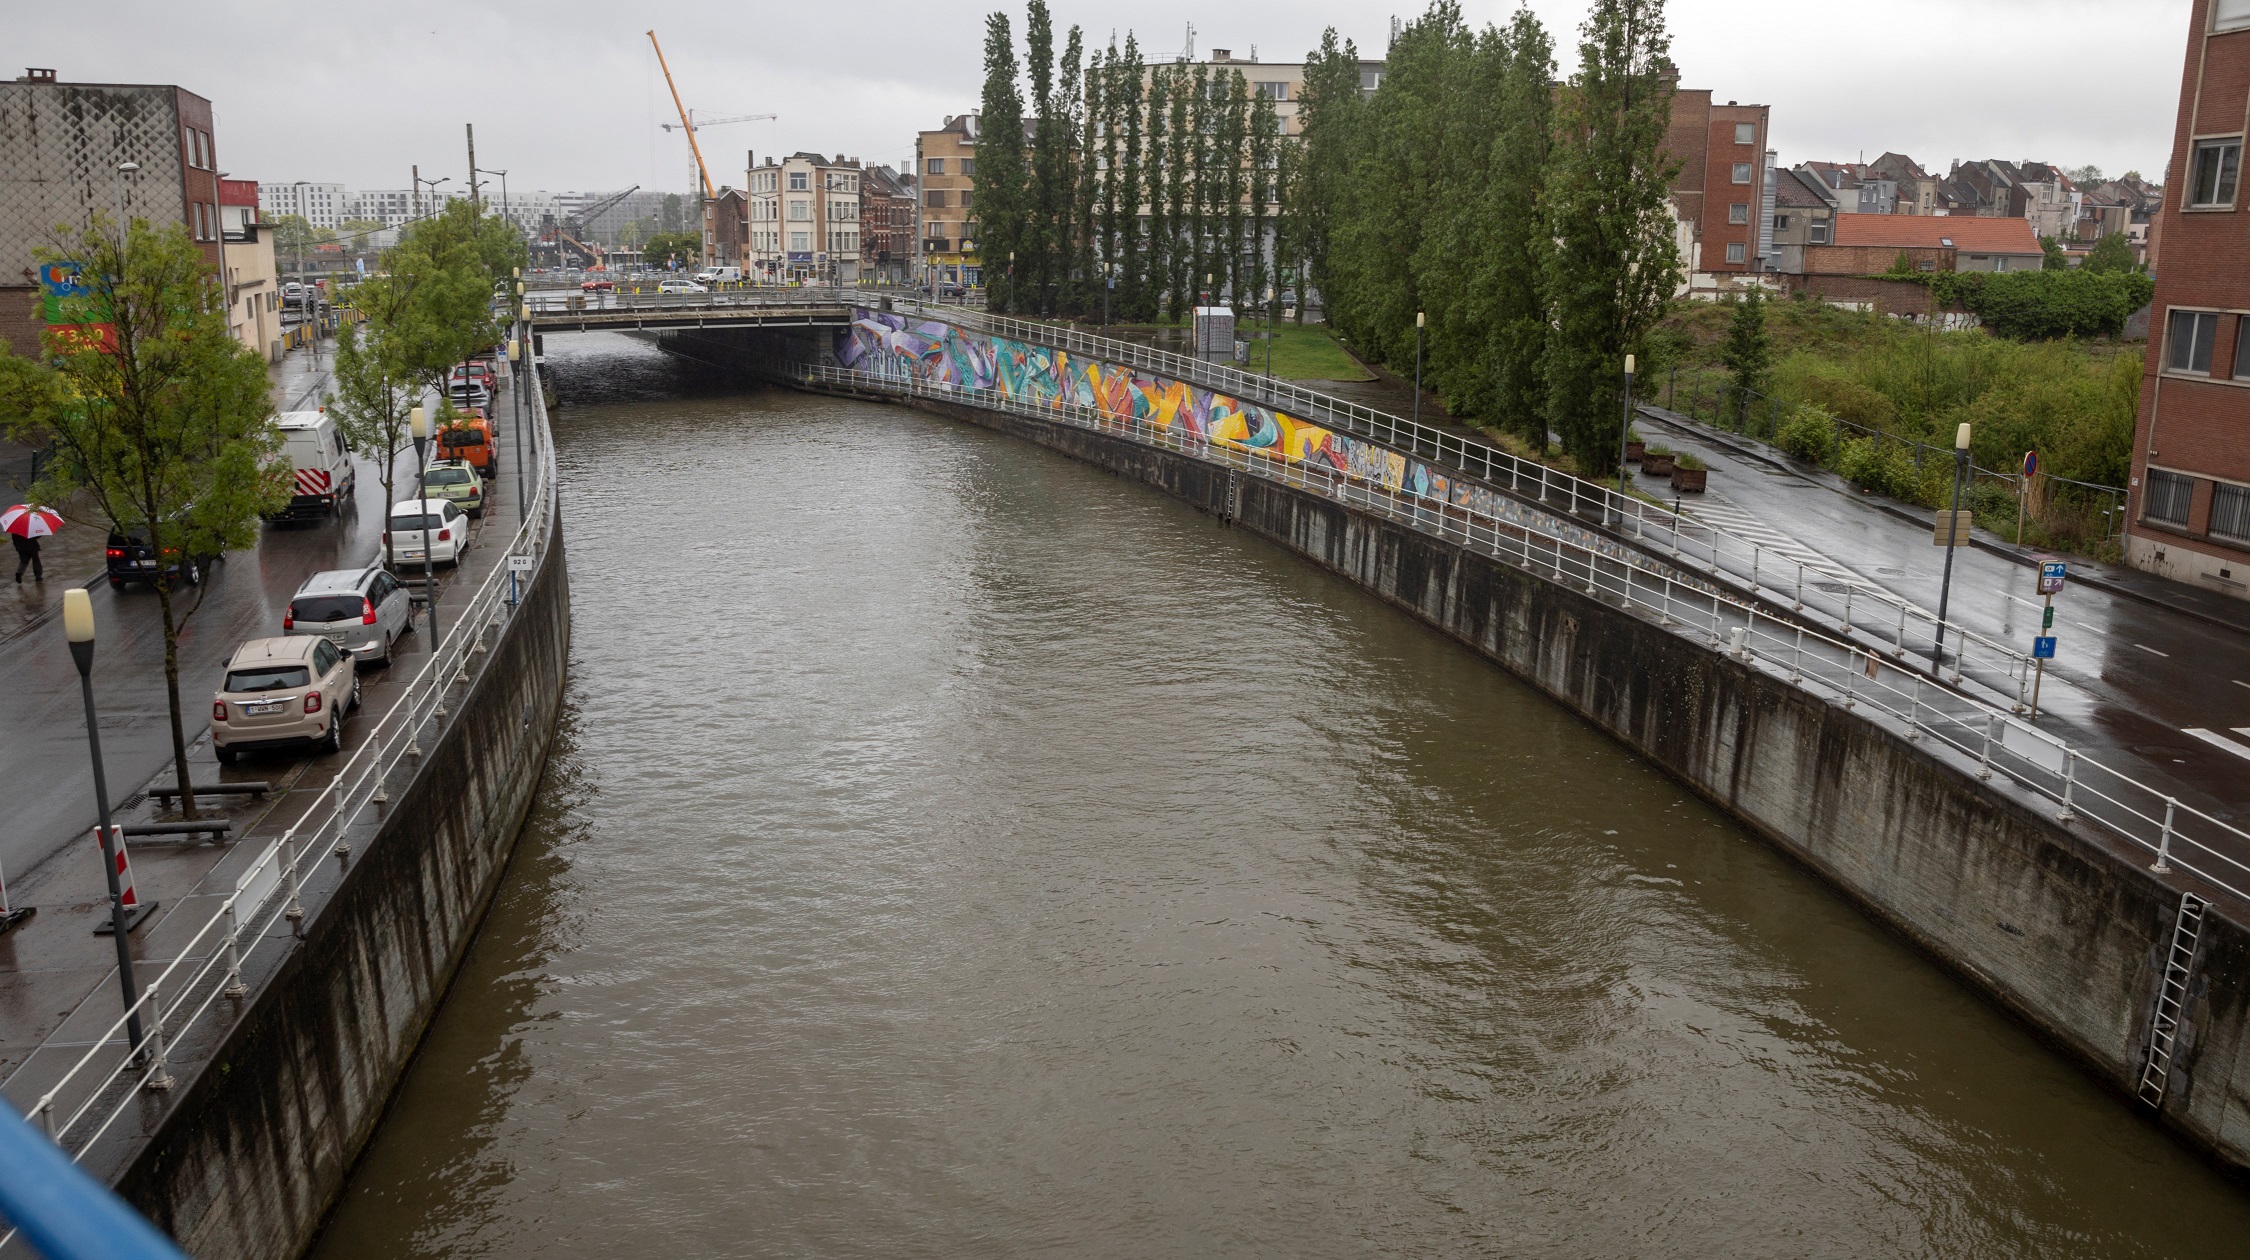 The Brussels Canal